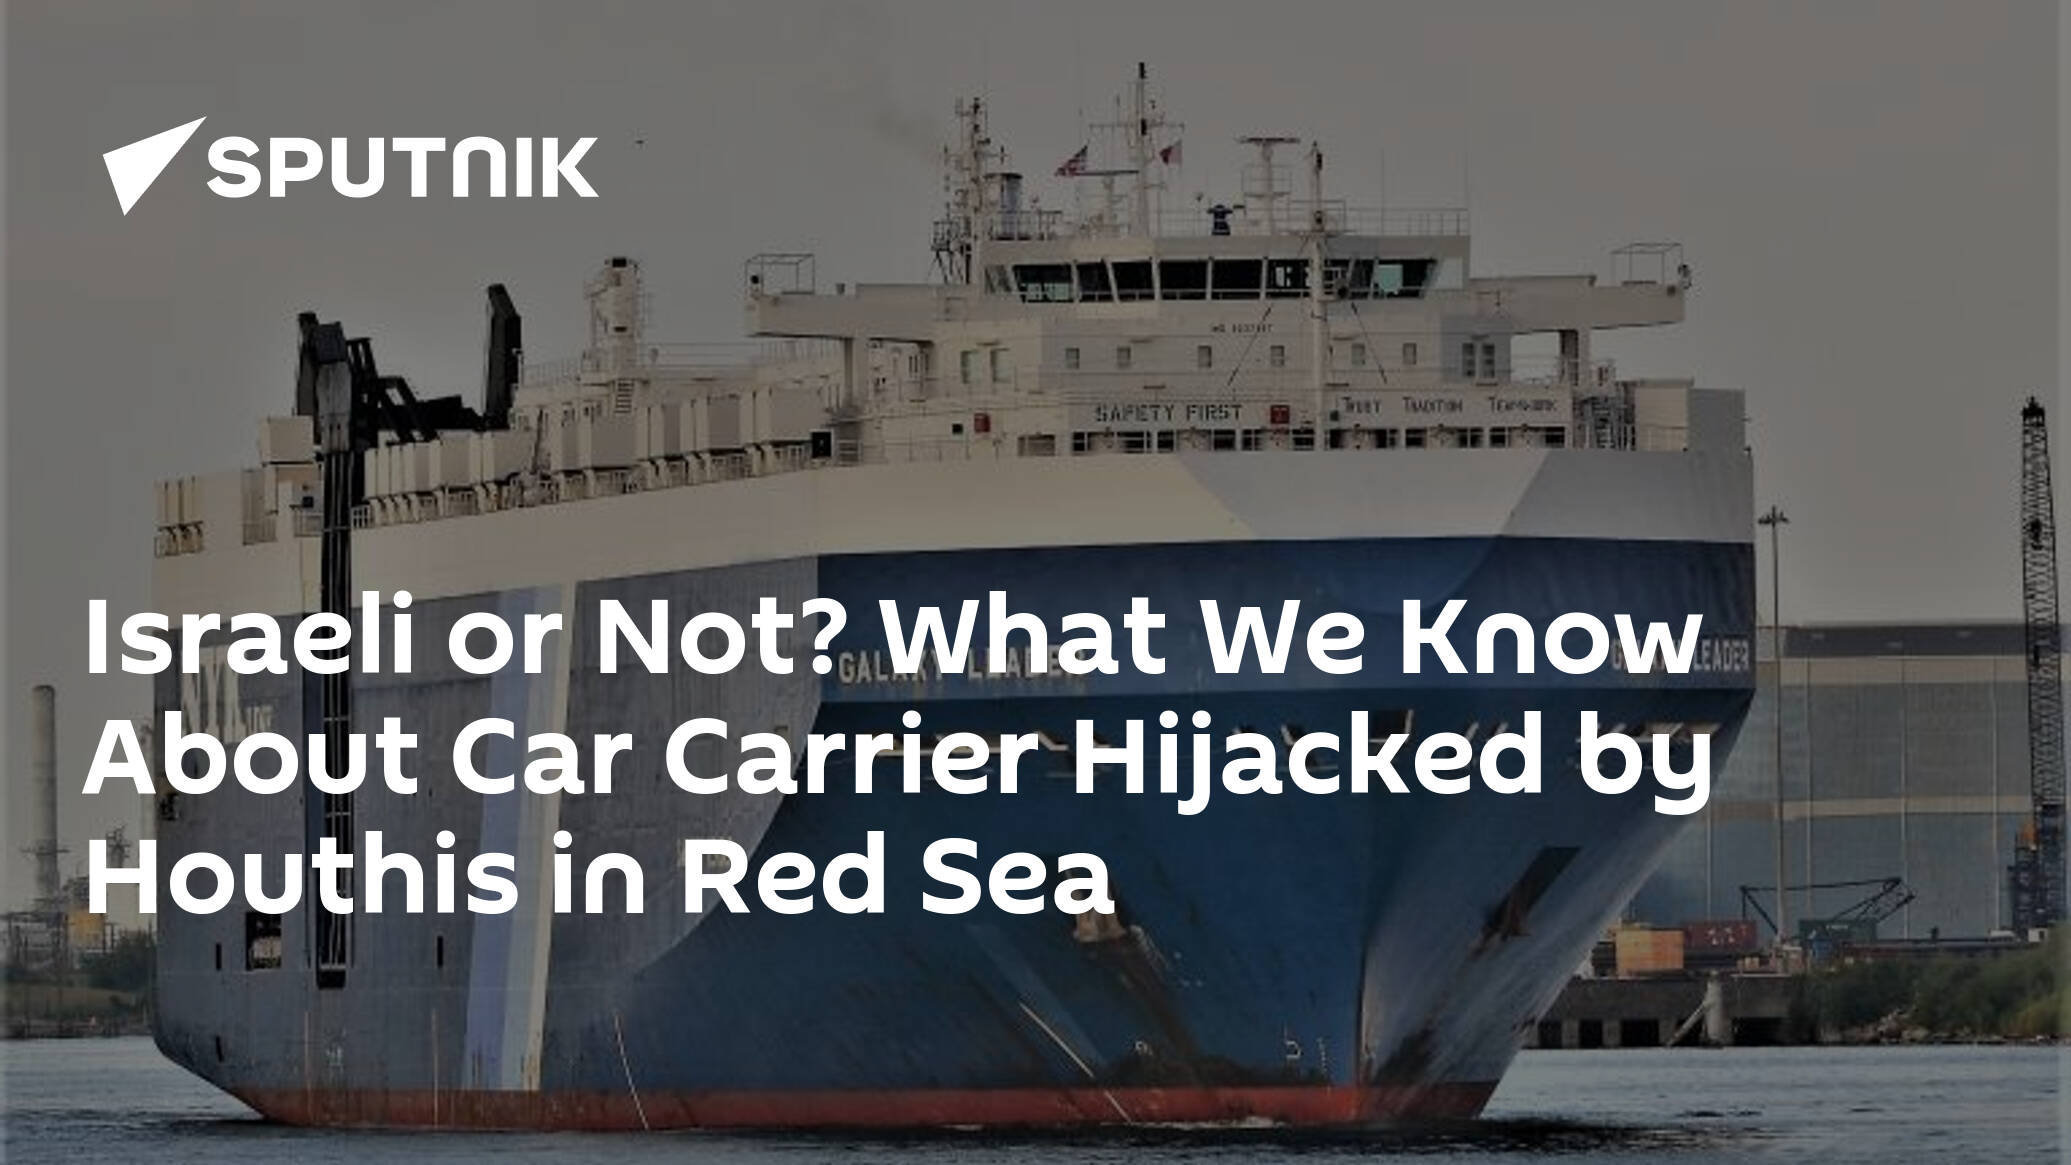 Israeli or Not? What We Know About Car Carrier Hijacked by Houthis in Red Sea